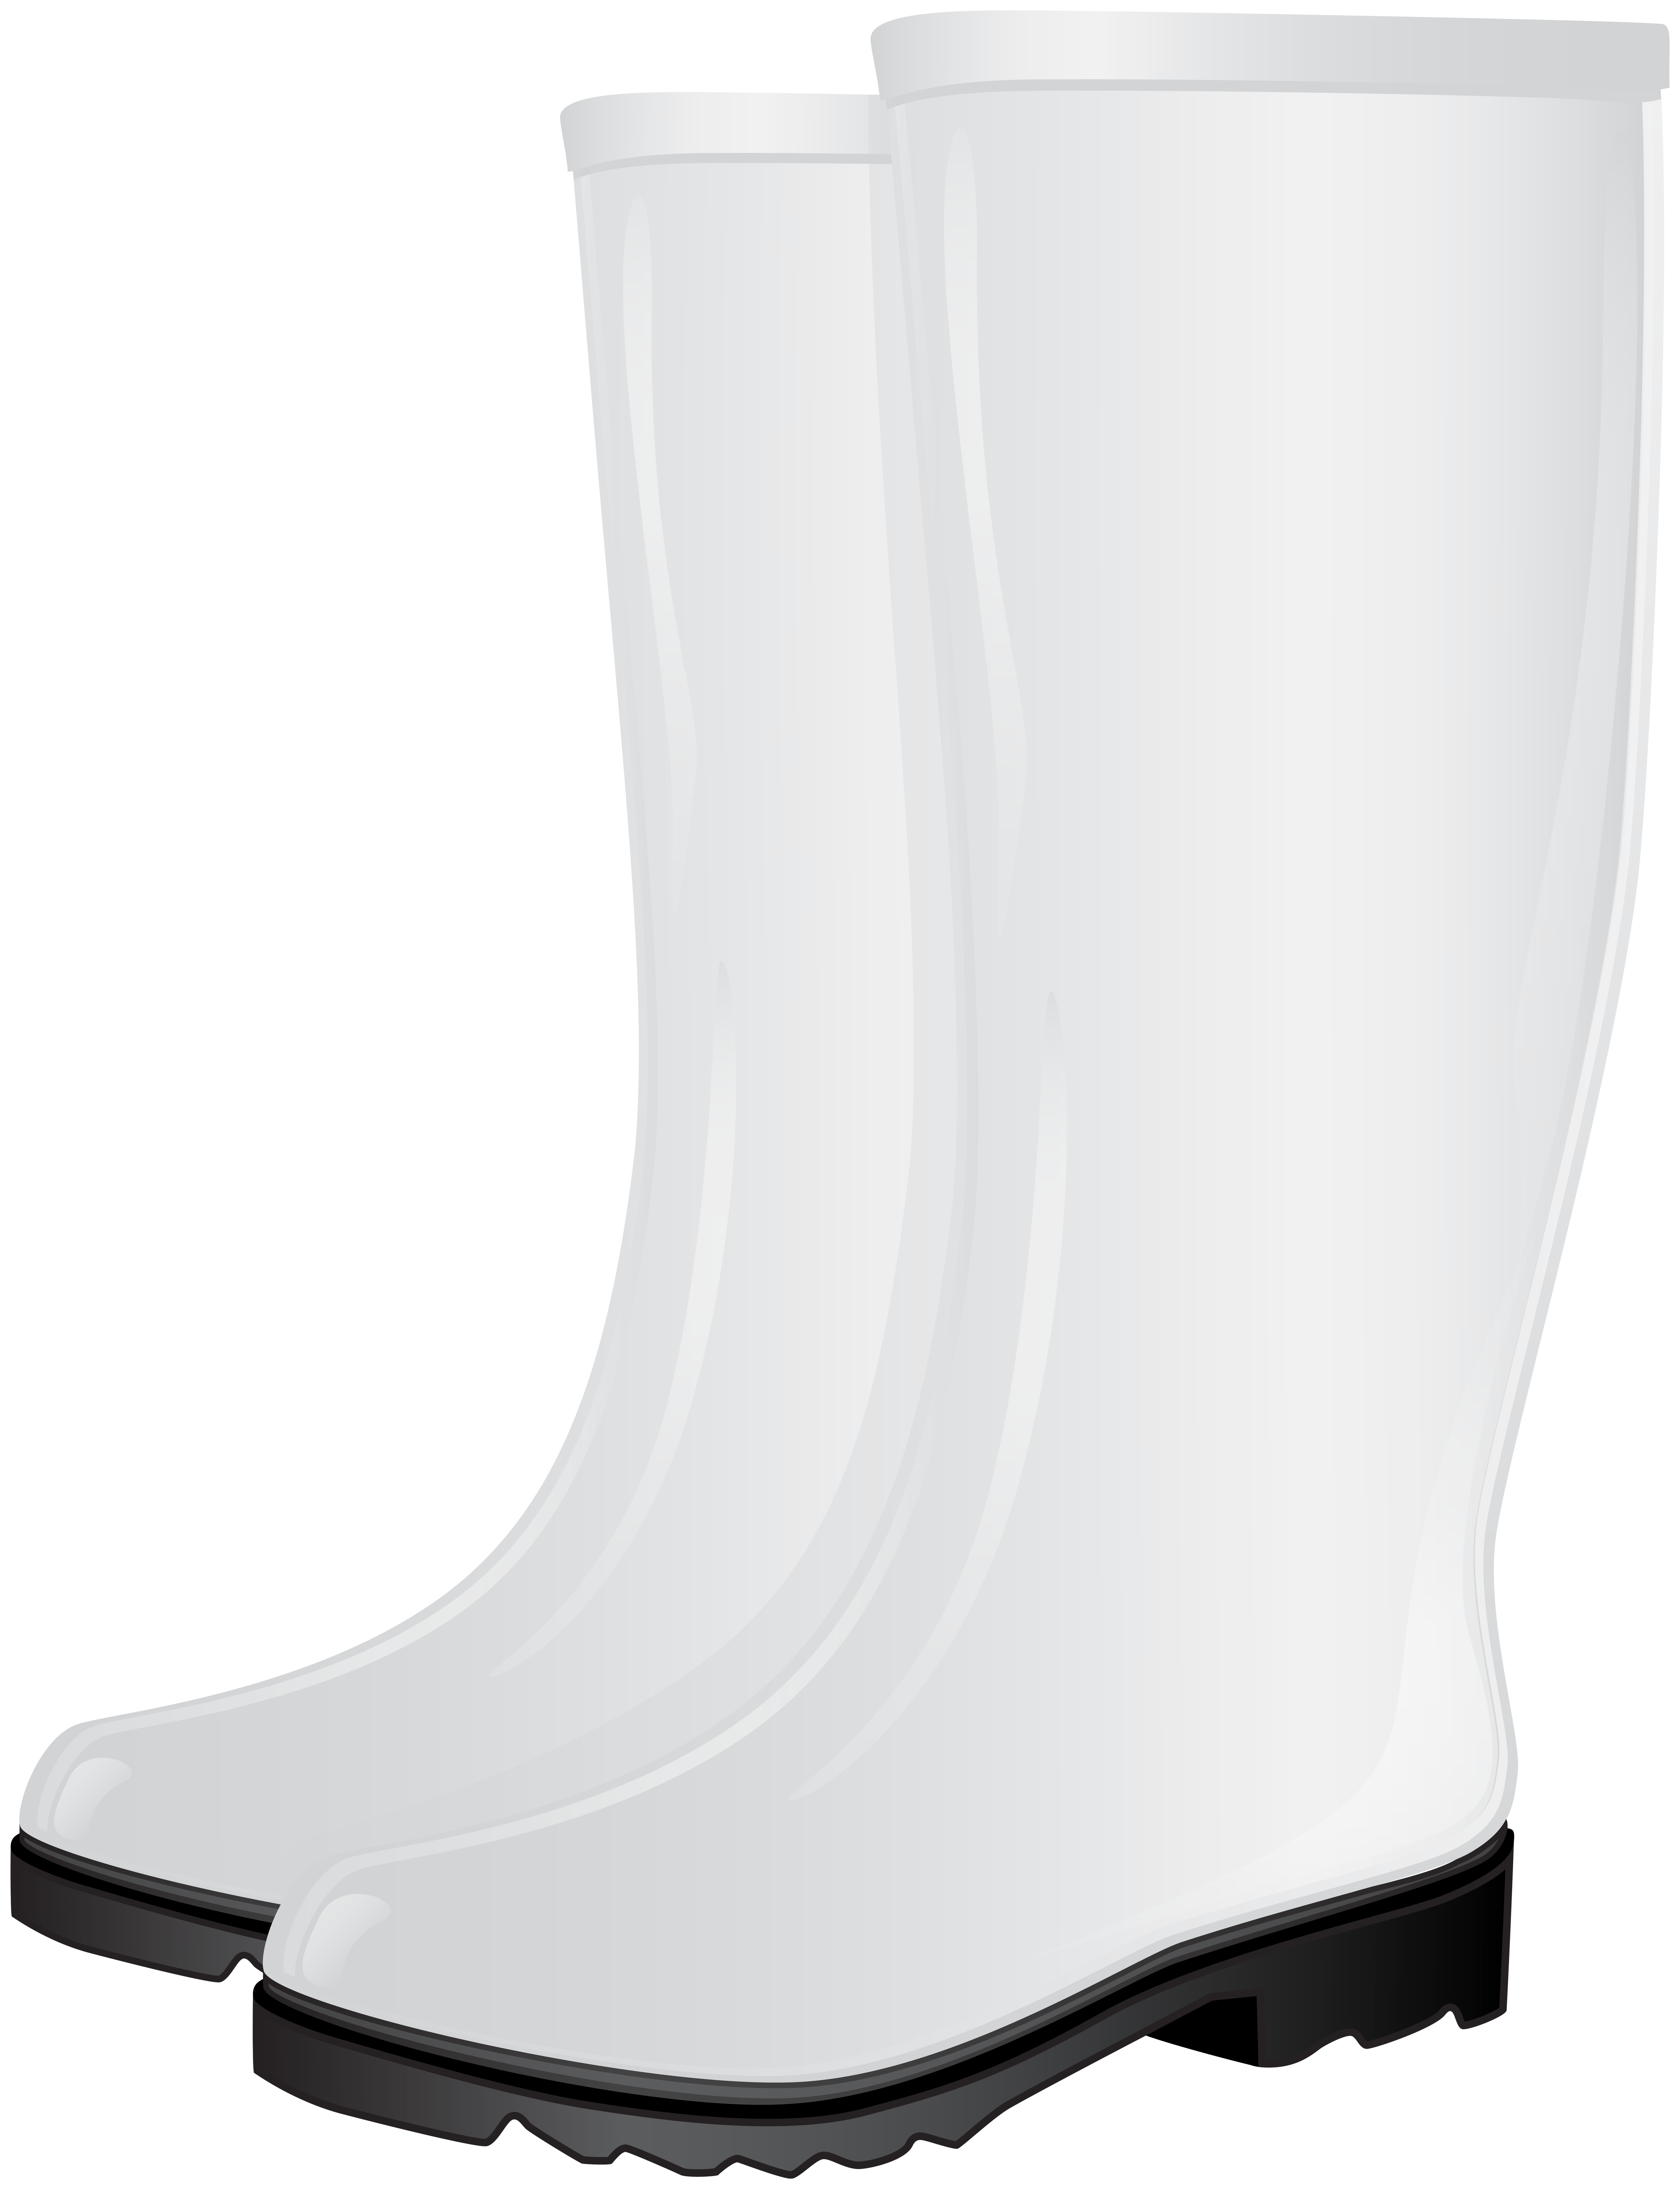 White Rubber Boots PNG Clip Art Image | Gallery Yopriceville - High ...